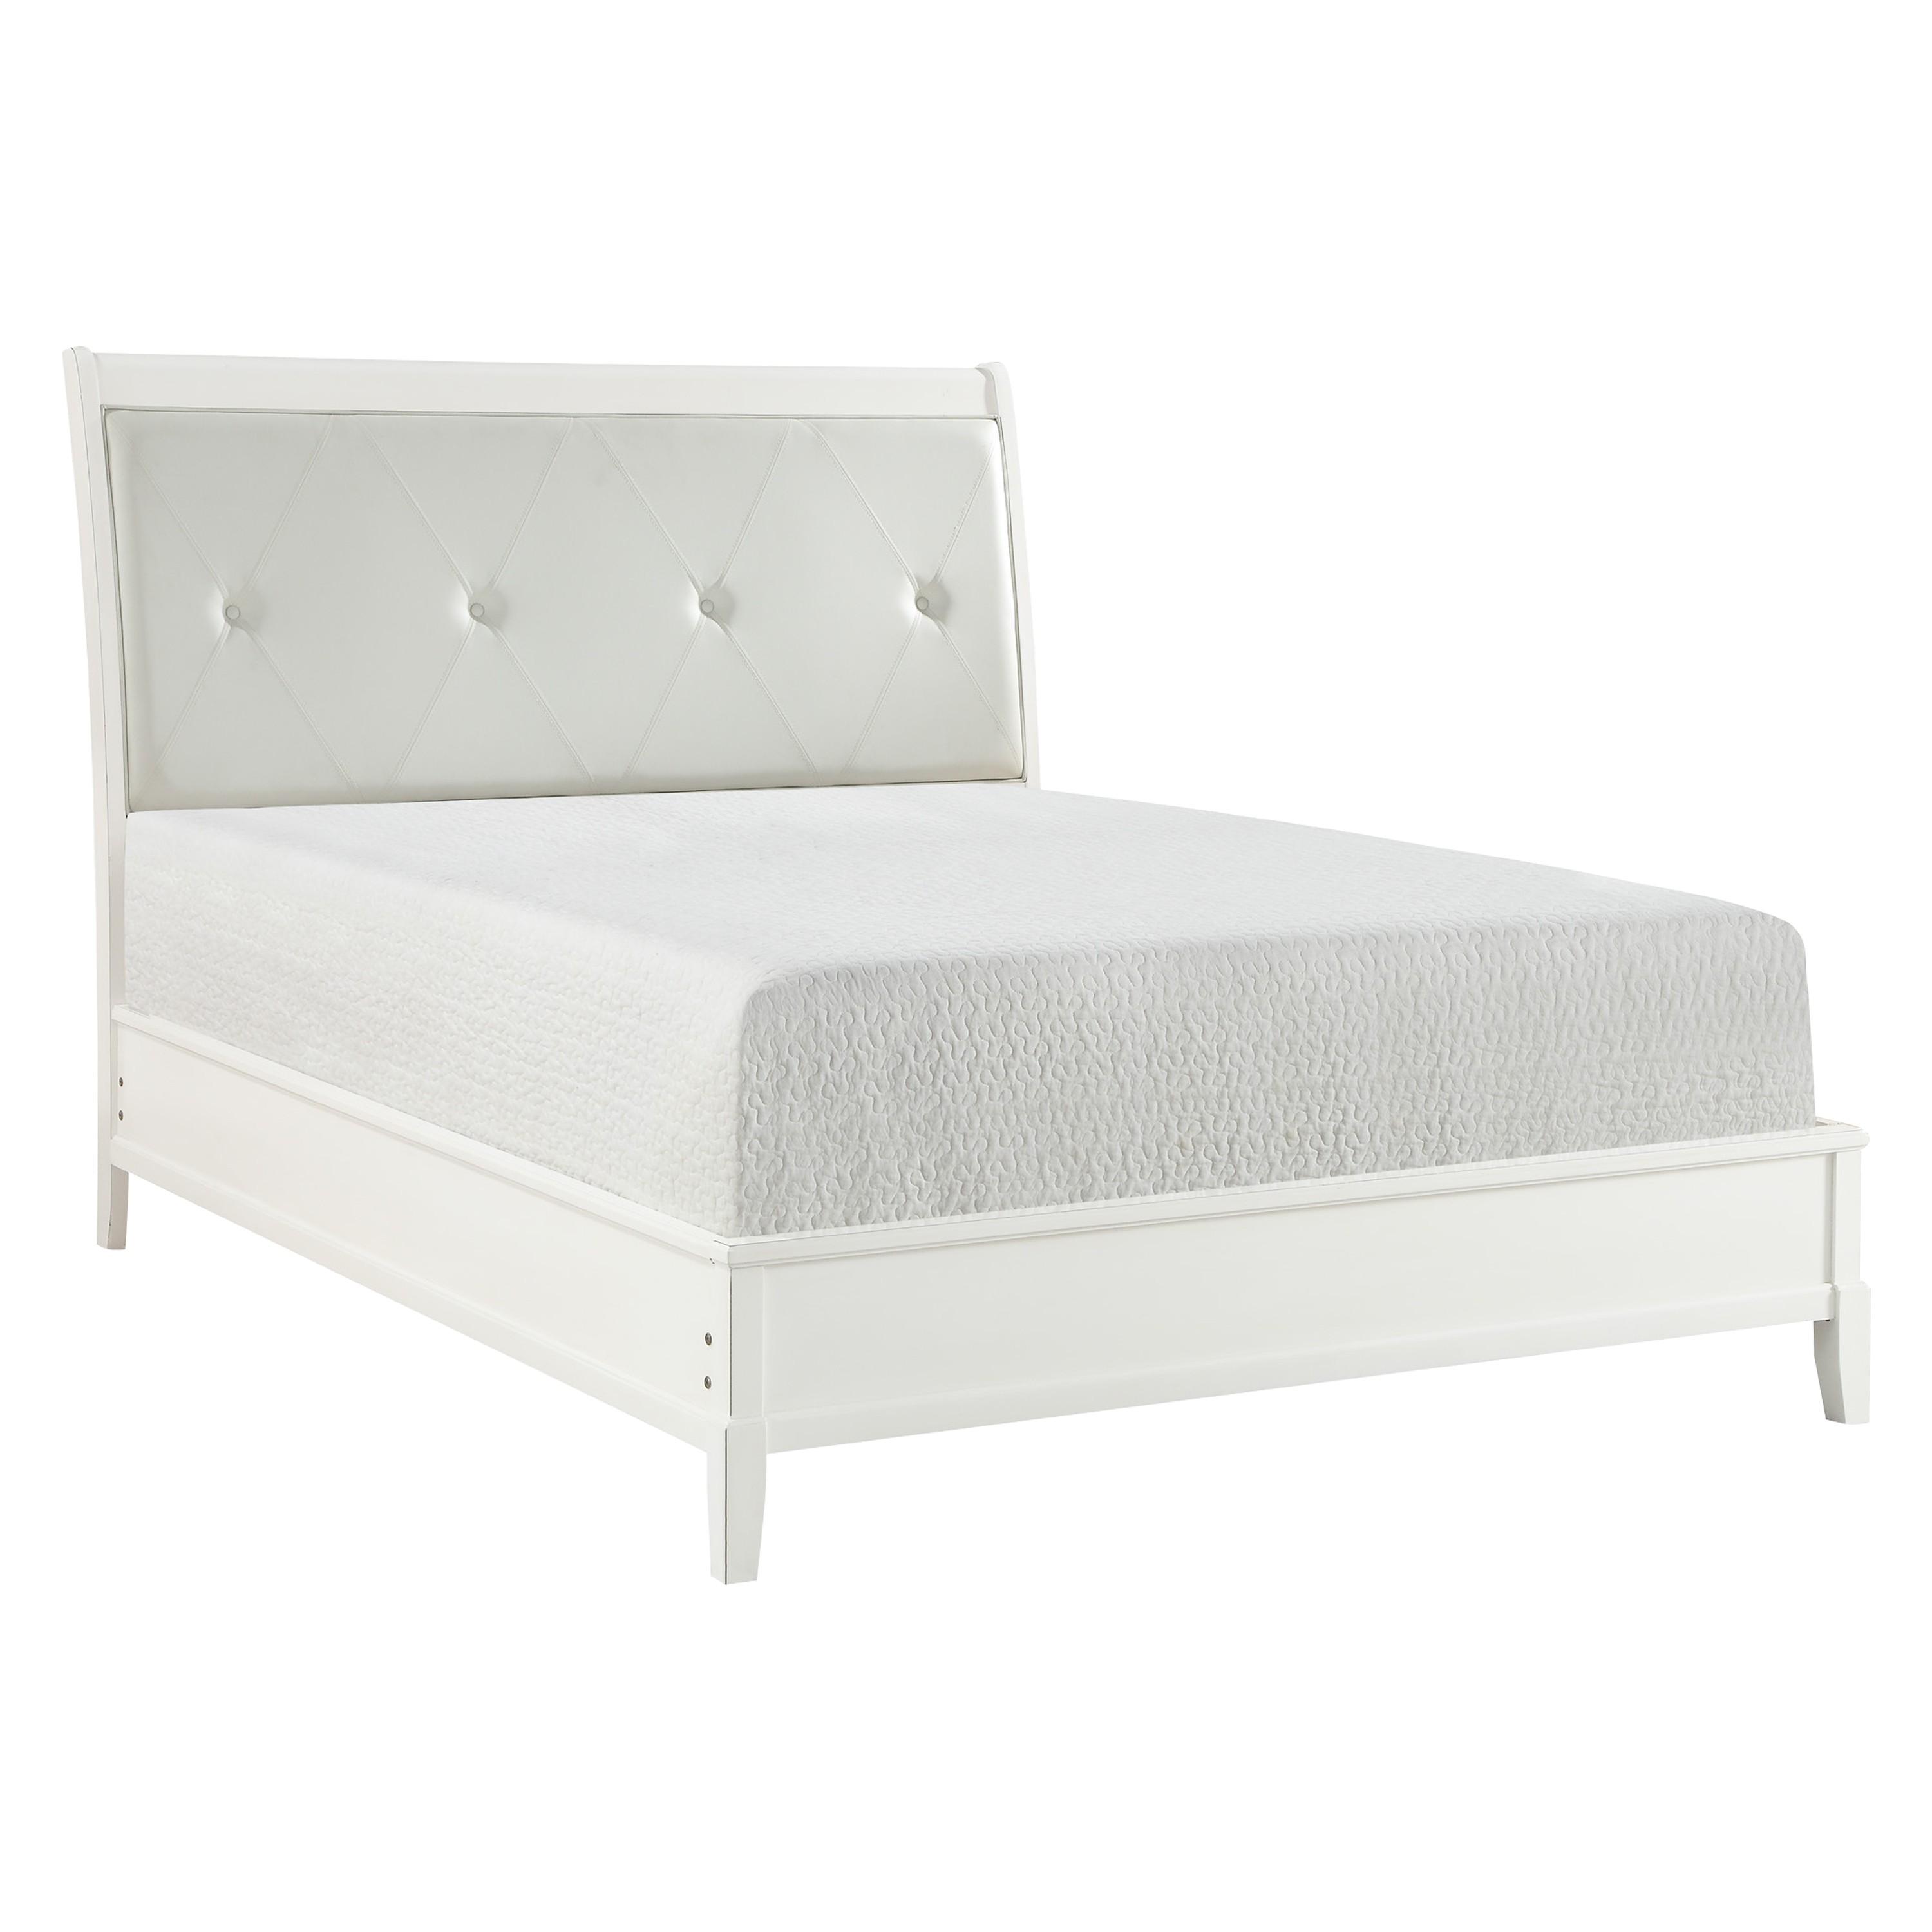 Transitional Bed 1730WW-1* Cotterill 1730WW-1* in Antique White Faux Leather